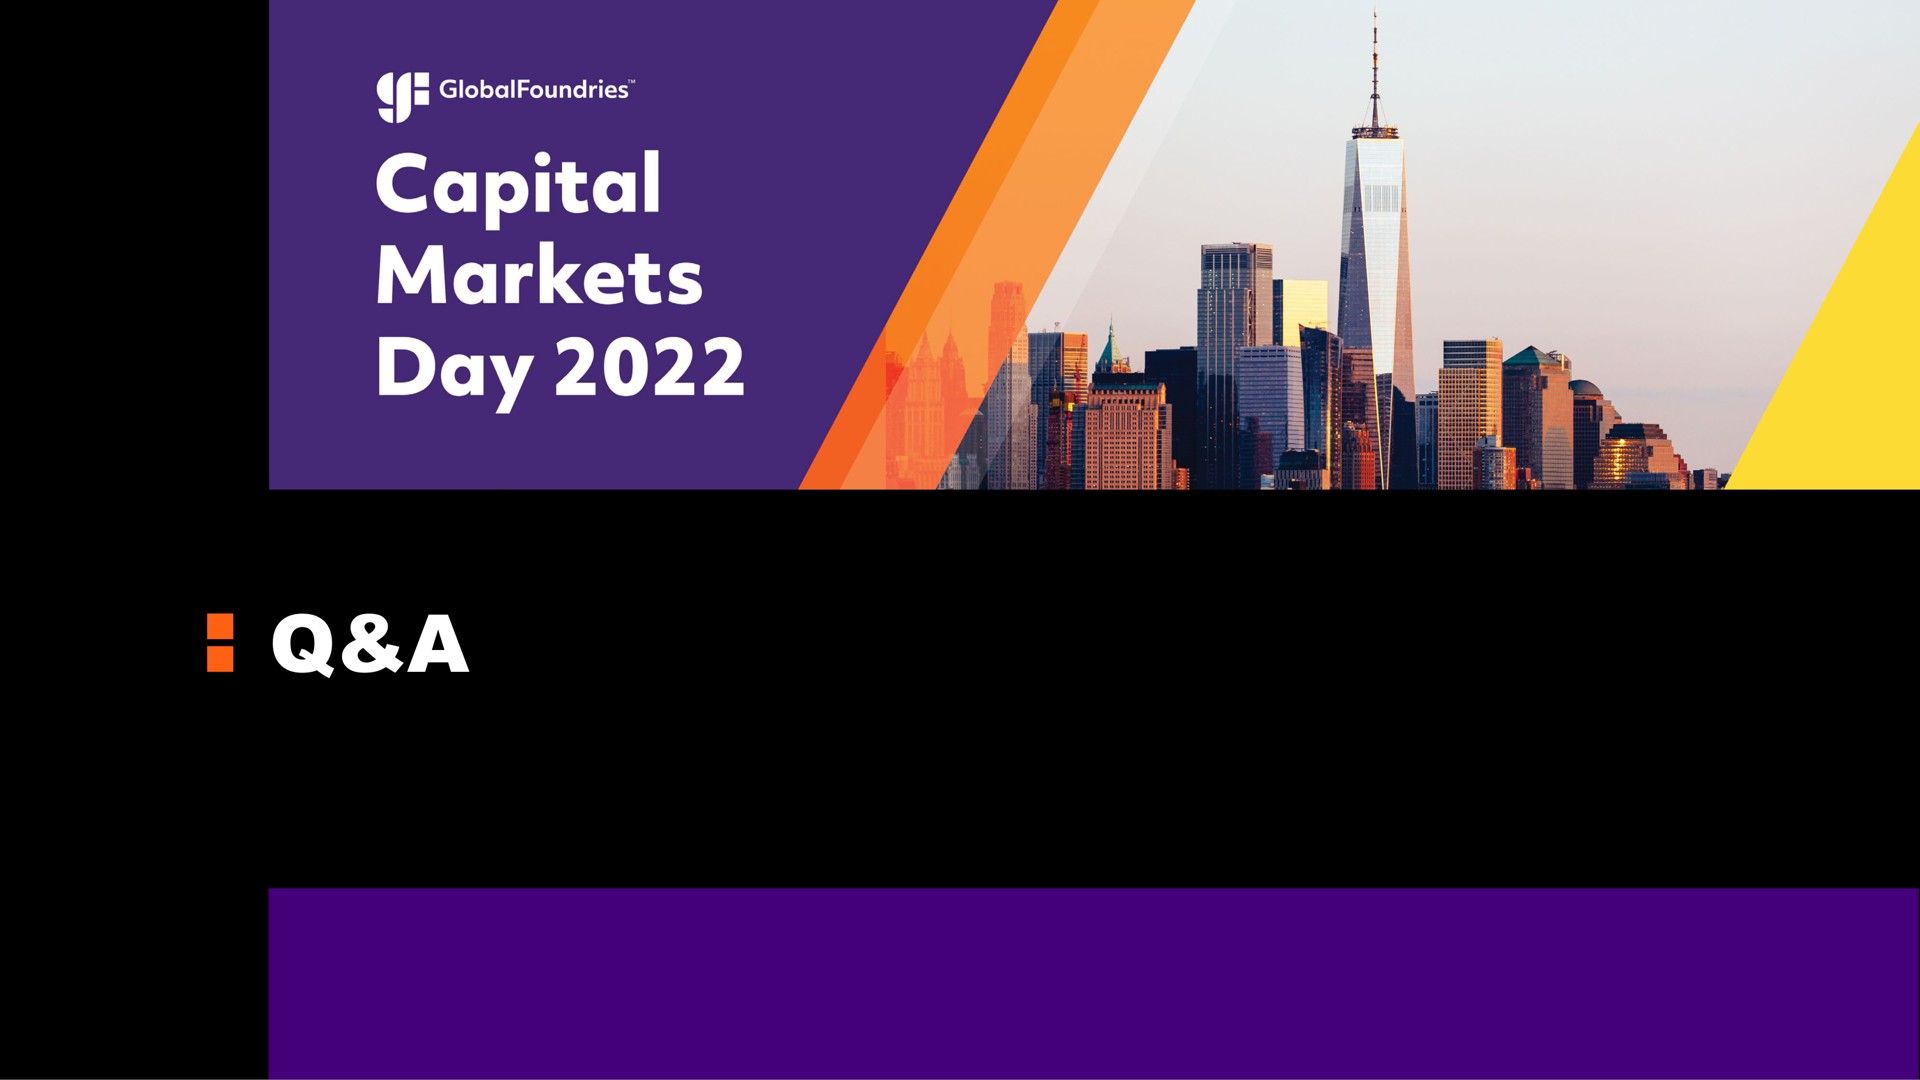 a capital markets day | GlobalFoundries